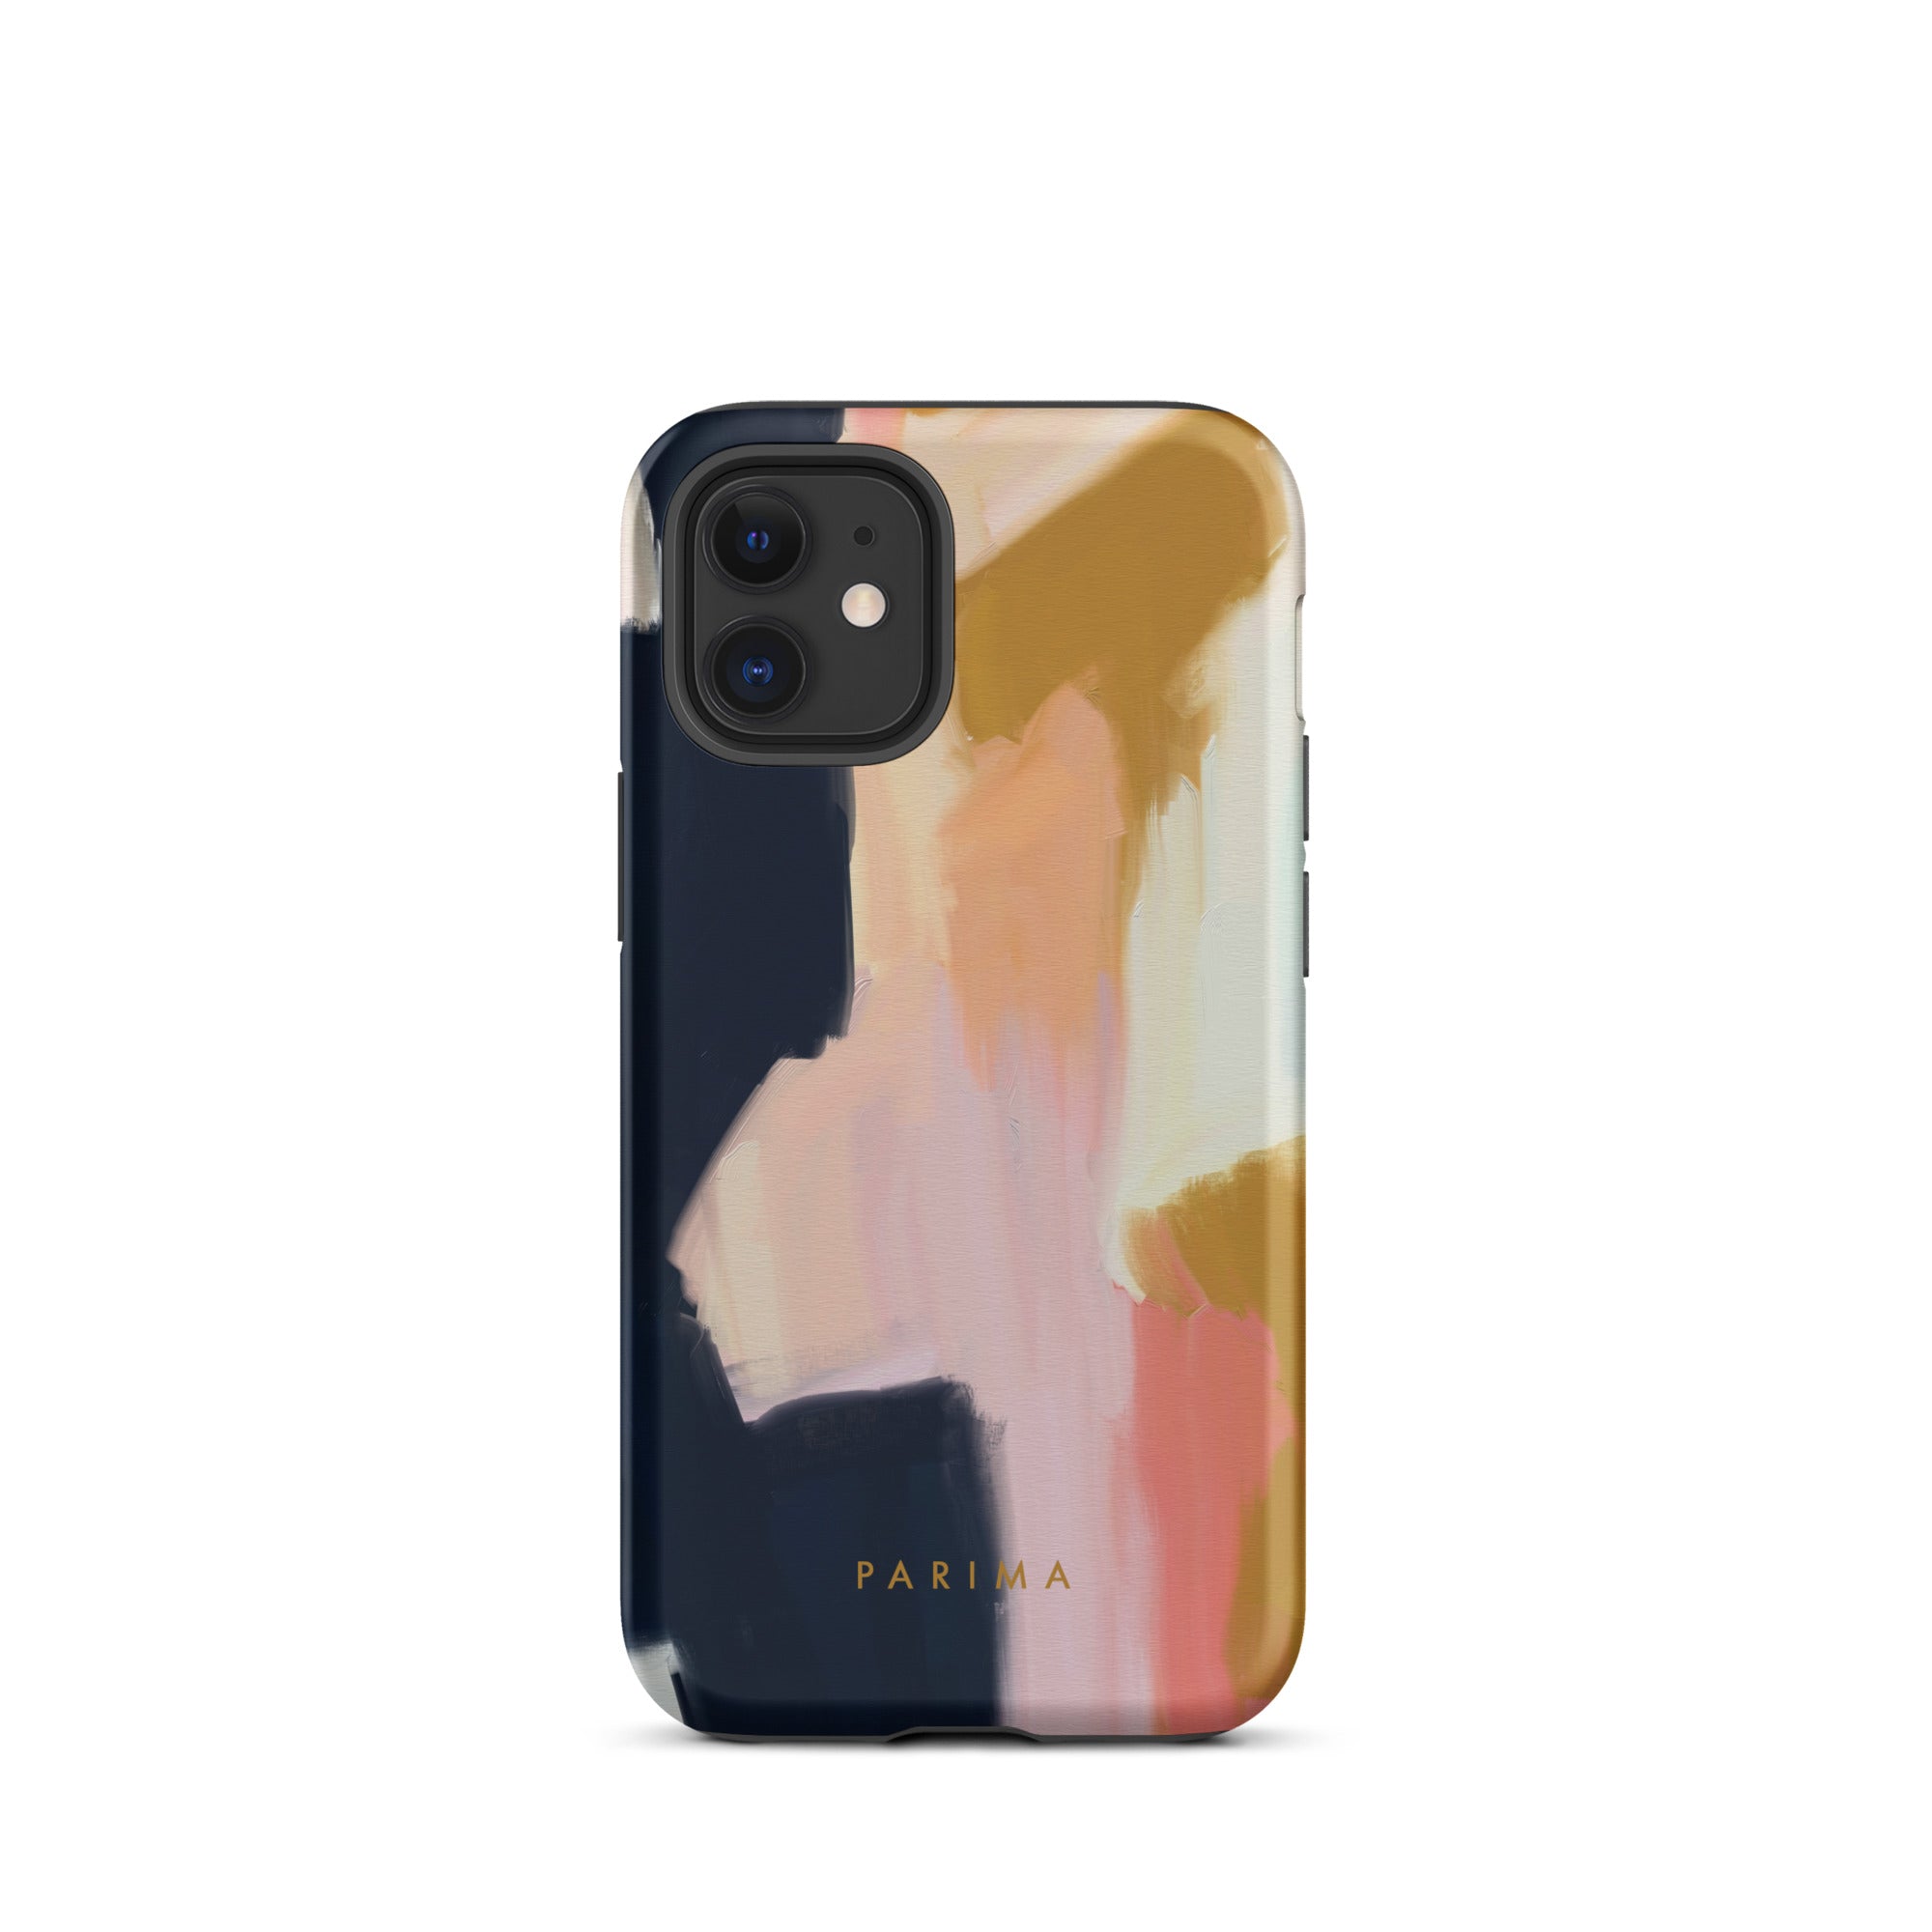 Kali, blue and gold abstract art - iPhone 12 Mini tough case by Parima Studio